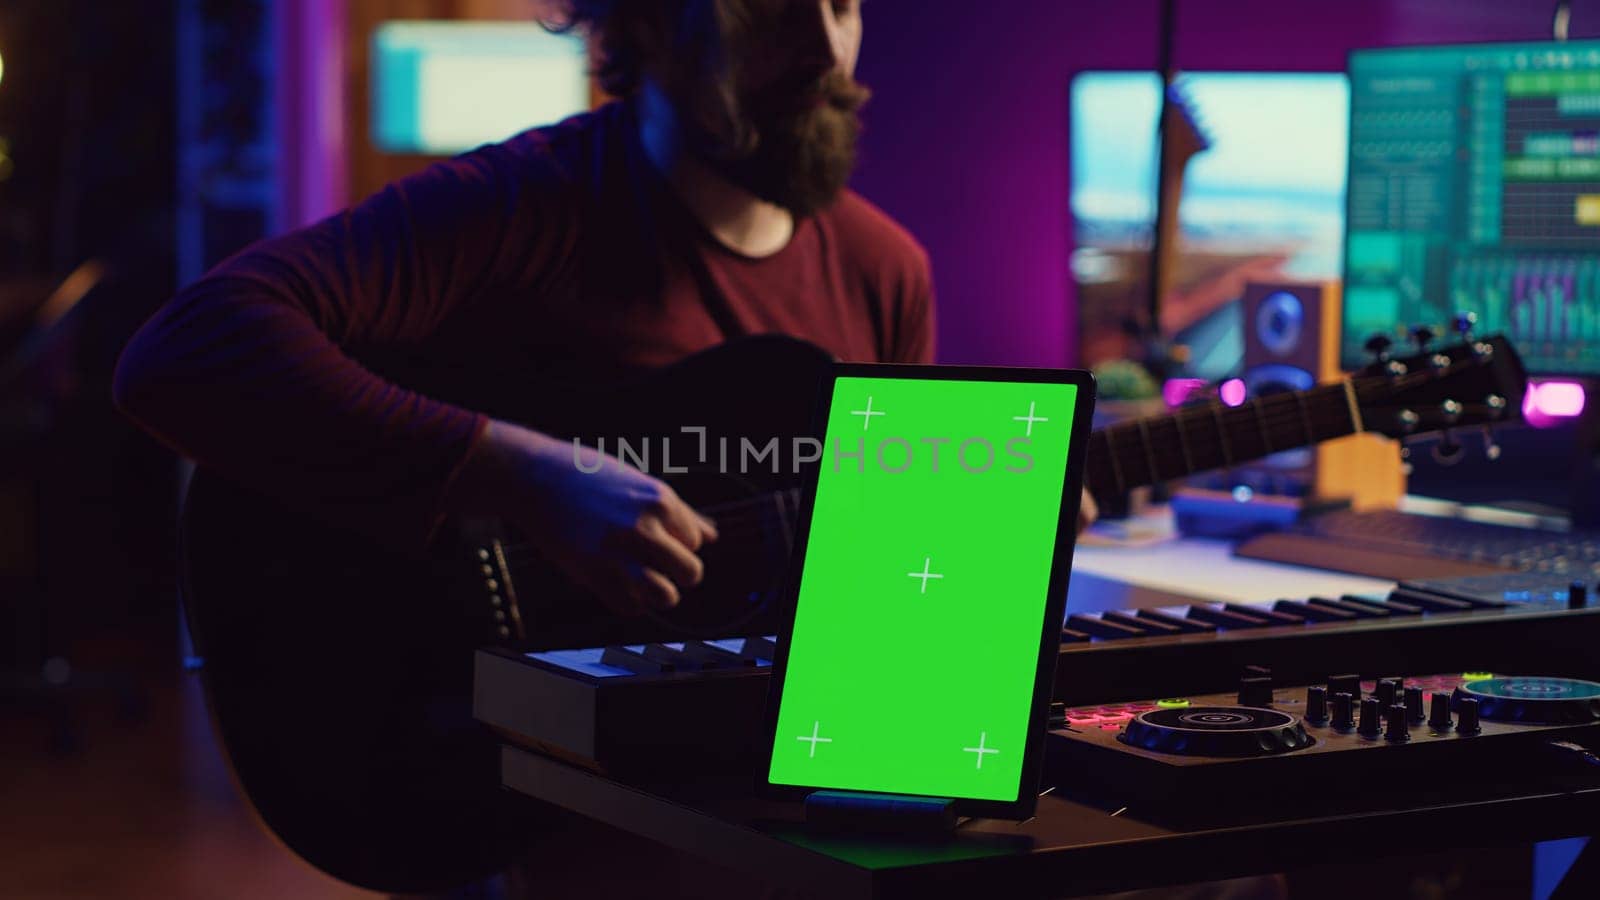 Composer performing acoustical guitar in his home studio, playing and practicing on strings. Musician learning multiple songs on instrument, uses tablet to run greenscreen display. Camera A.